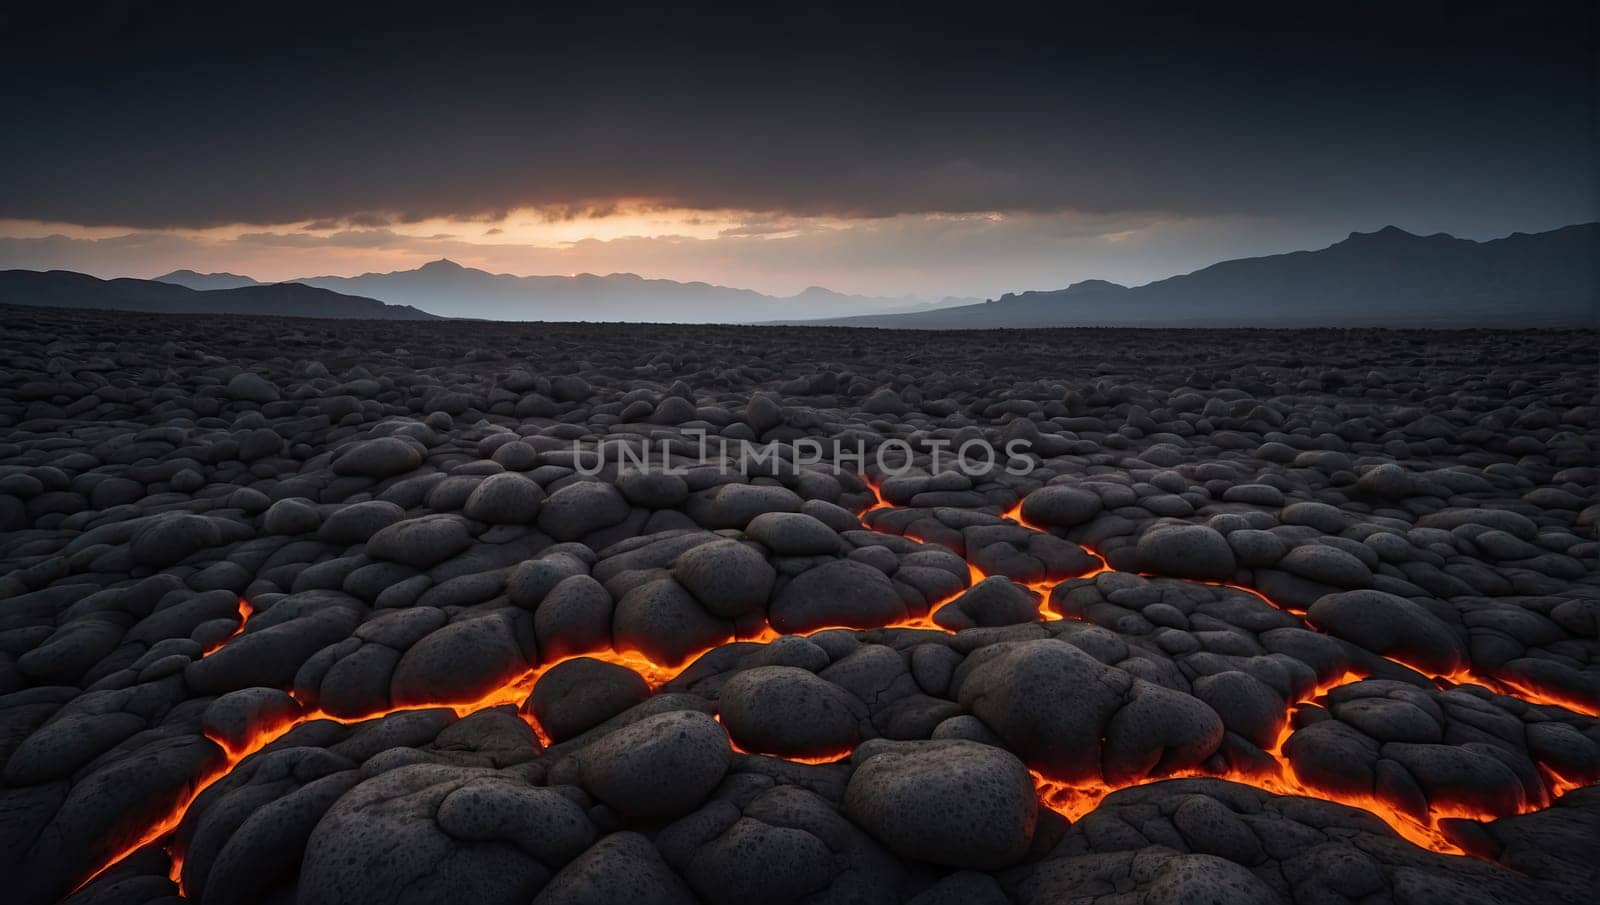 Cooling lava field by applesstock